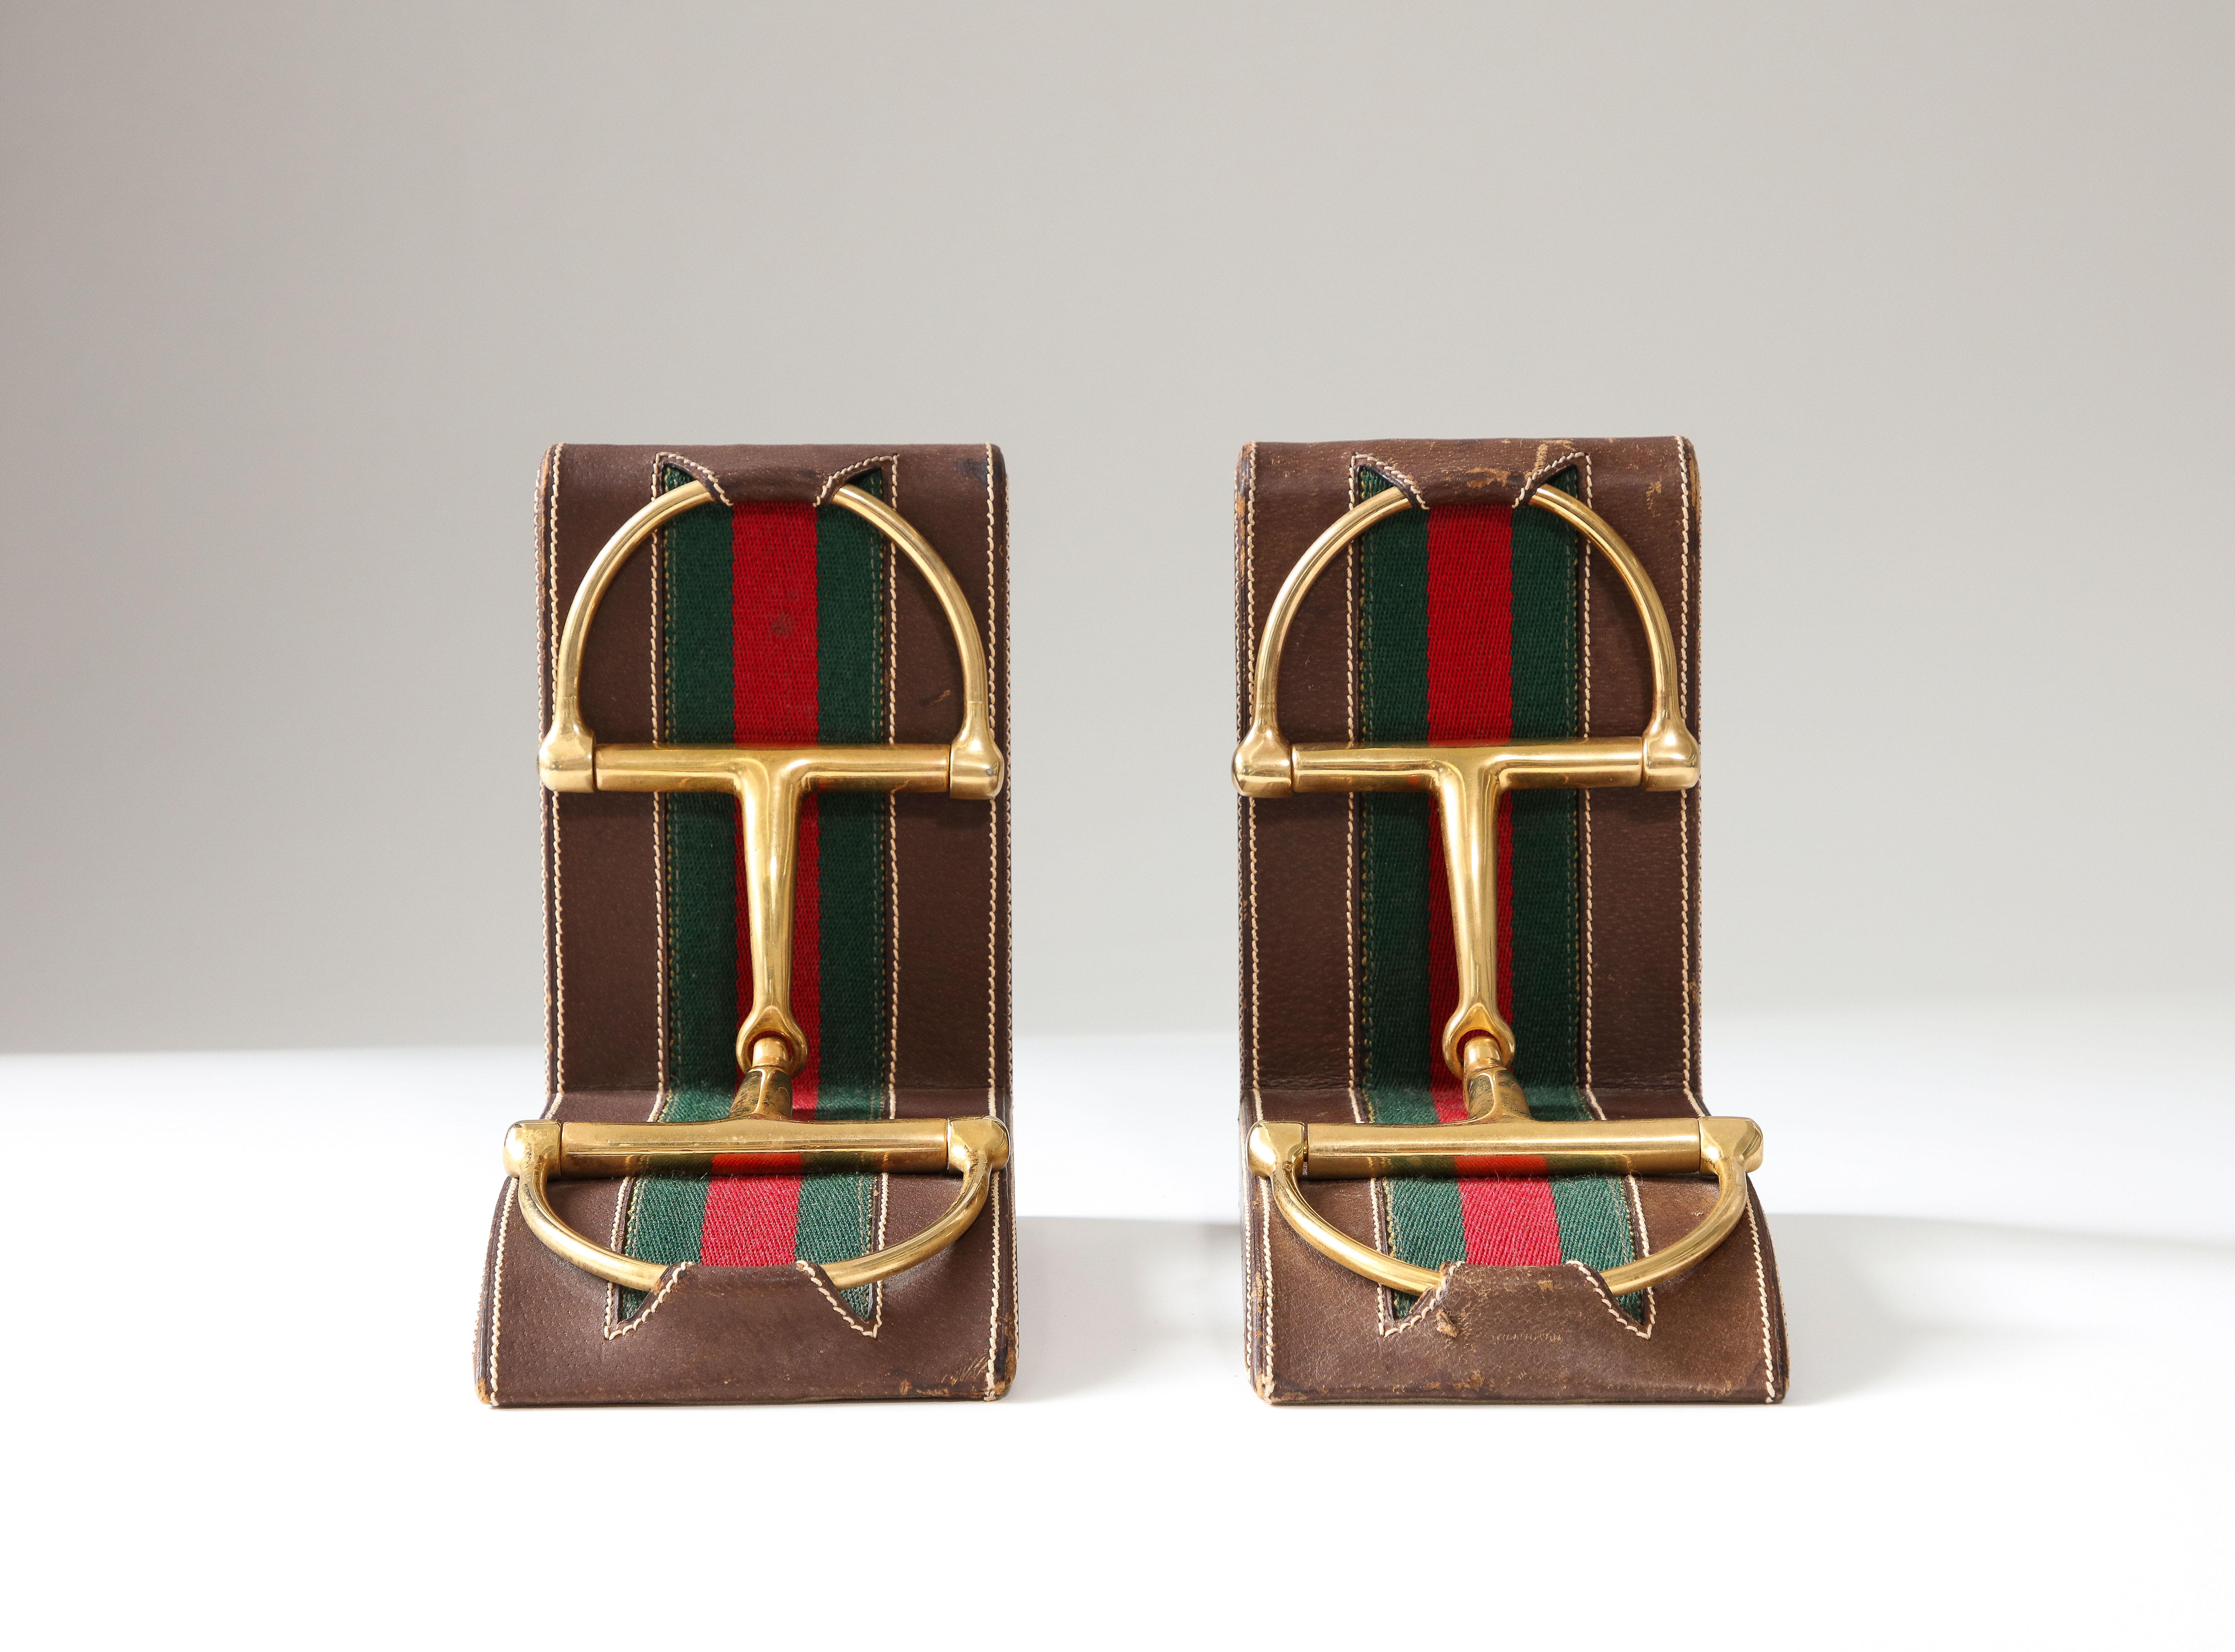 Classic, refined bookends from Gucci, decorated with patinated brass horsebits and a contrast stitched leather.